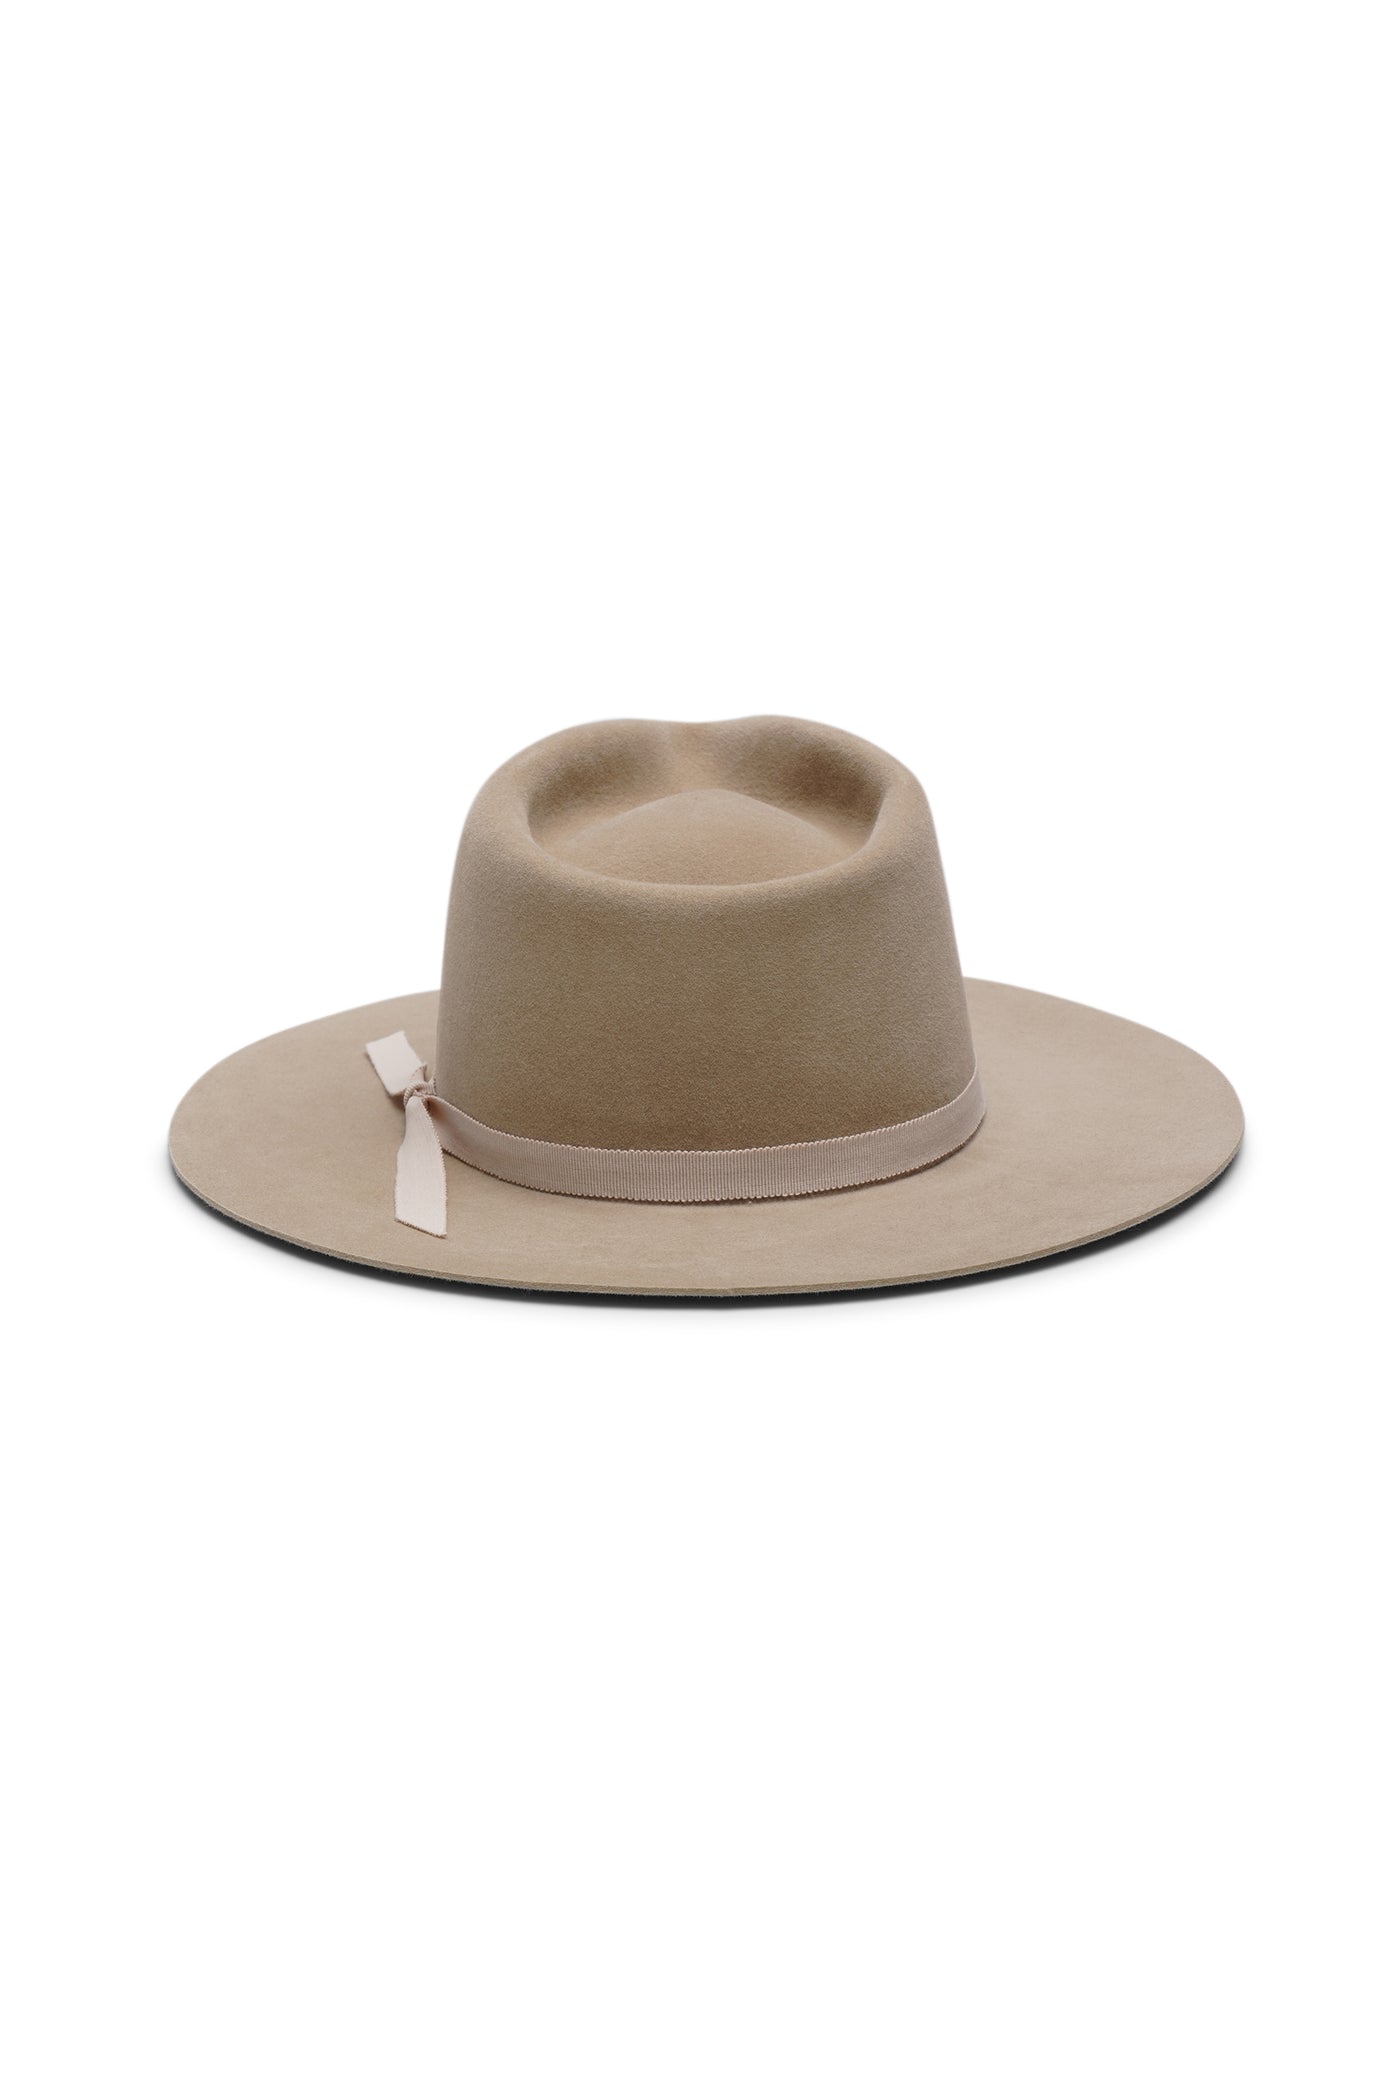 Beige fur felt fedora hat with a wide brim and light beige ribbon. Unisex hat style in various sizes and colors. We ship worldwide. Shop now. Each SoonNoon hat is handmade with unique character in Stockholm, Sweden.